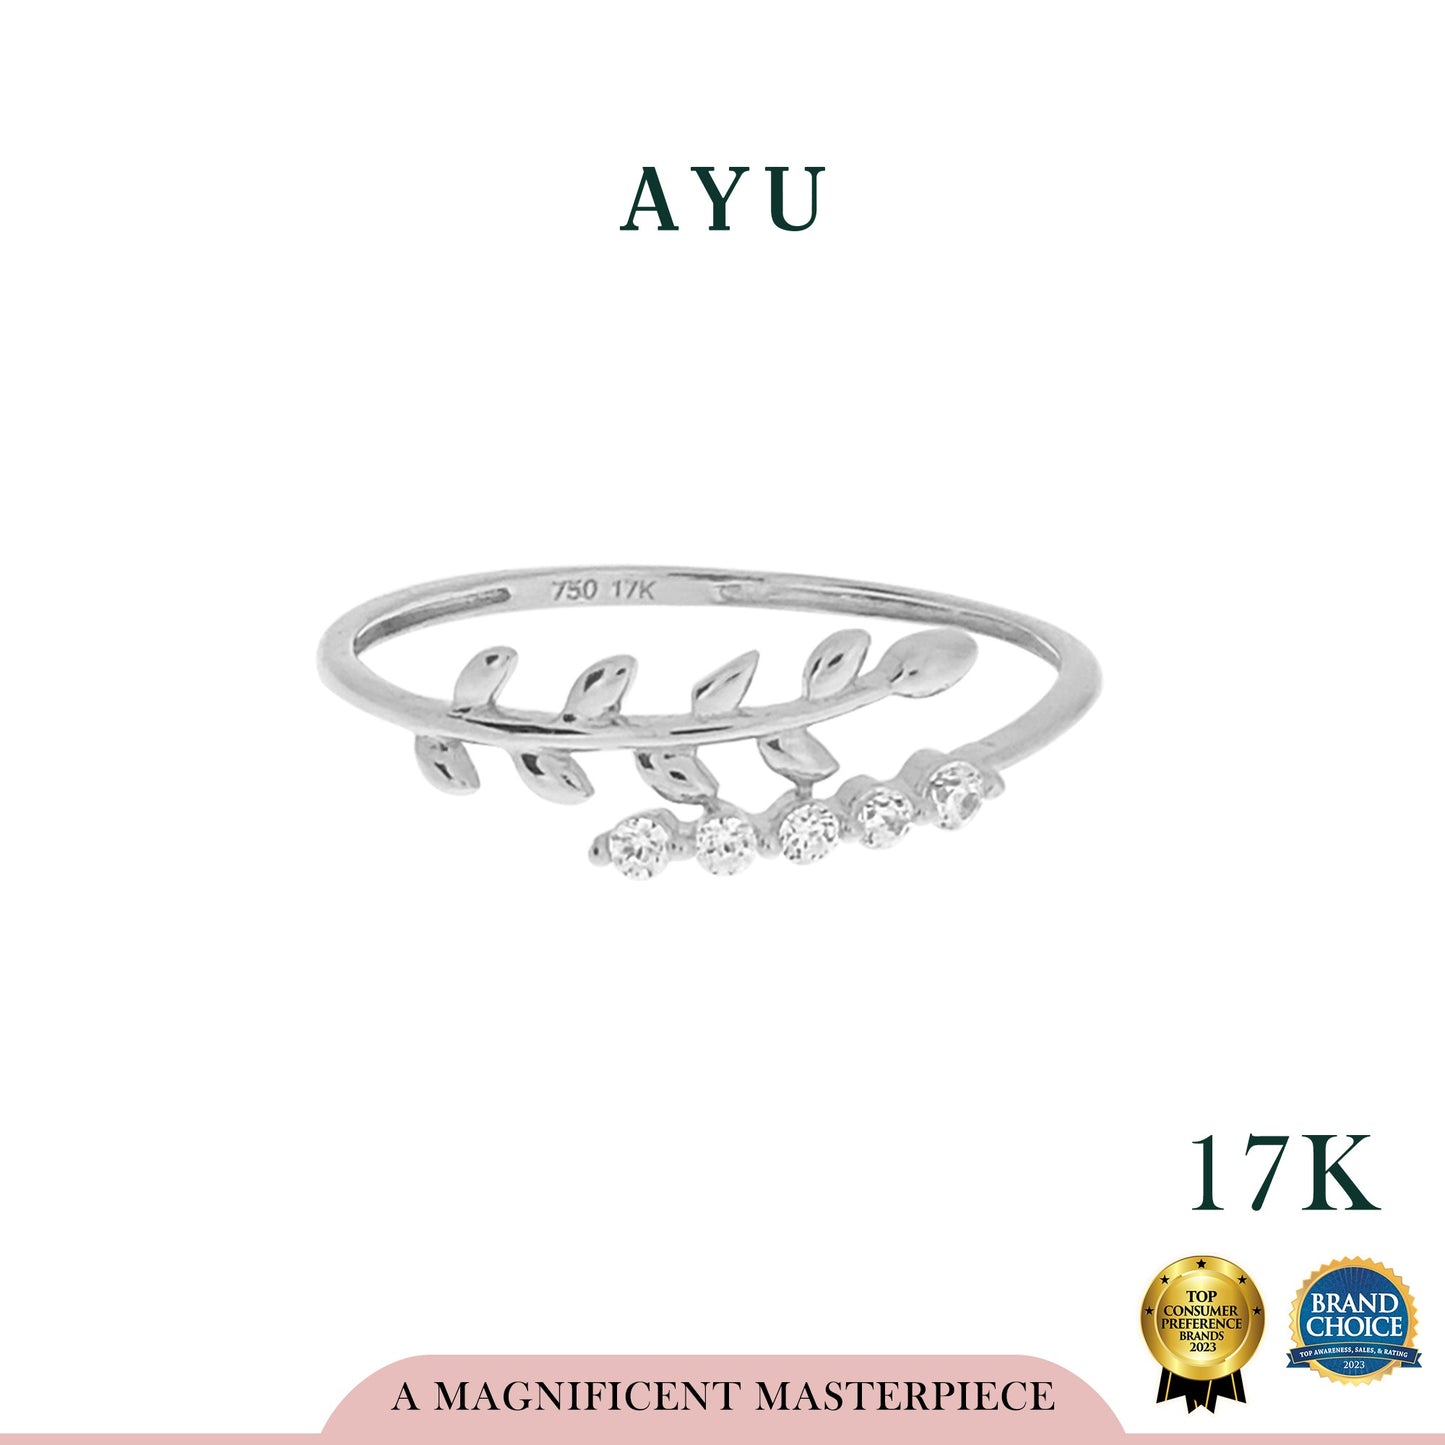 AYU Angel Vine And Single Prong Wrap Ring 17K White Gold